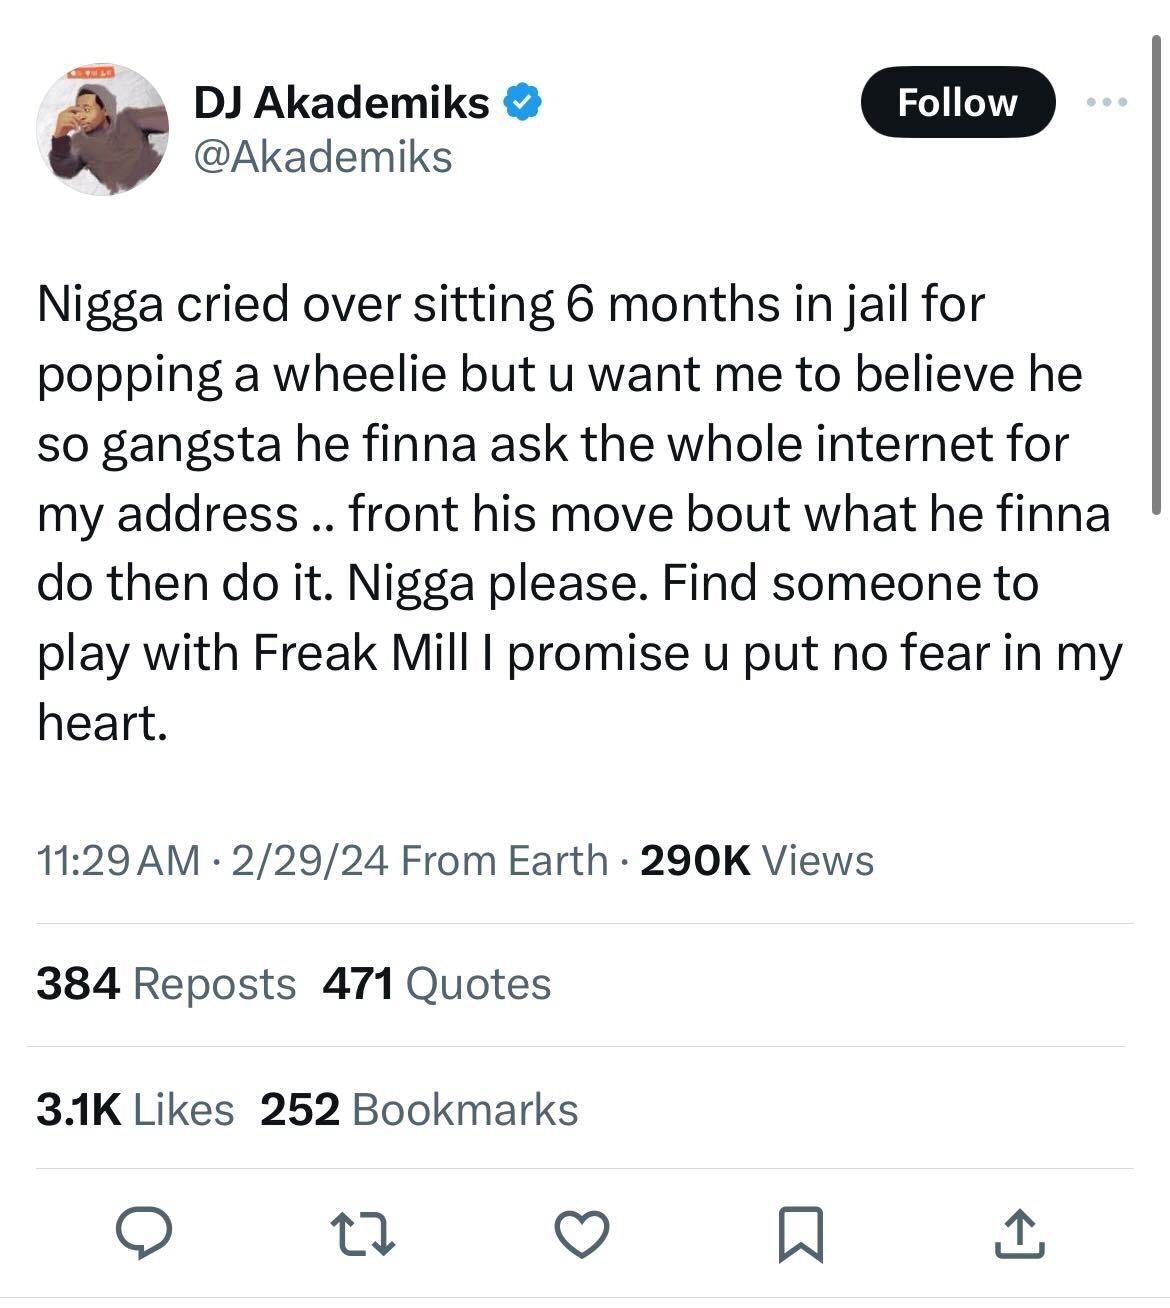 Screenshot of a tweet from DJ Akademiks discussing someone&#x27;s reaction to a six-month jail sentence and internet critics